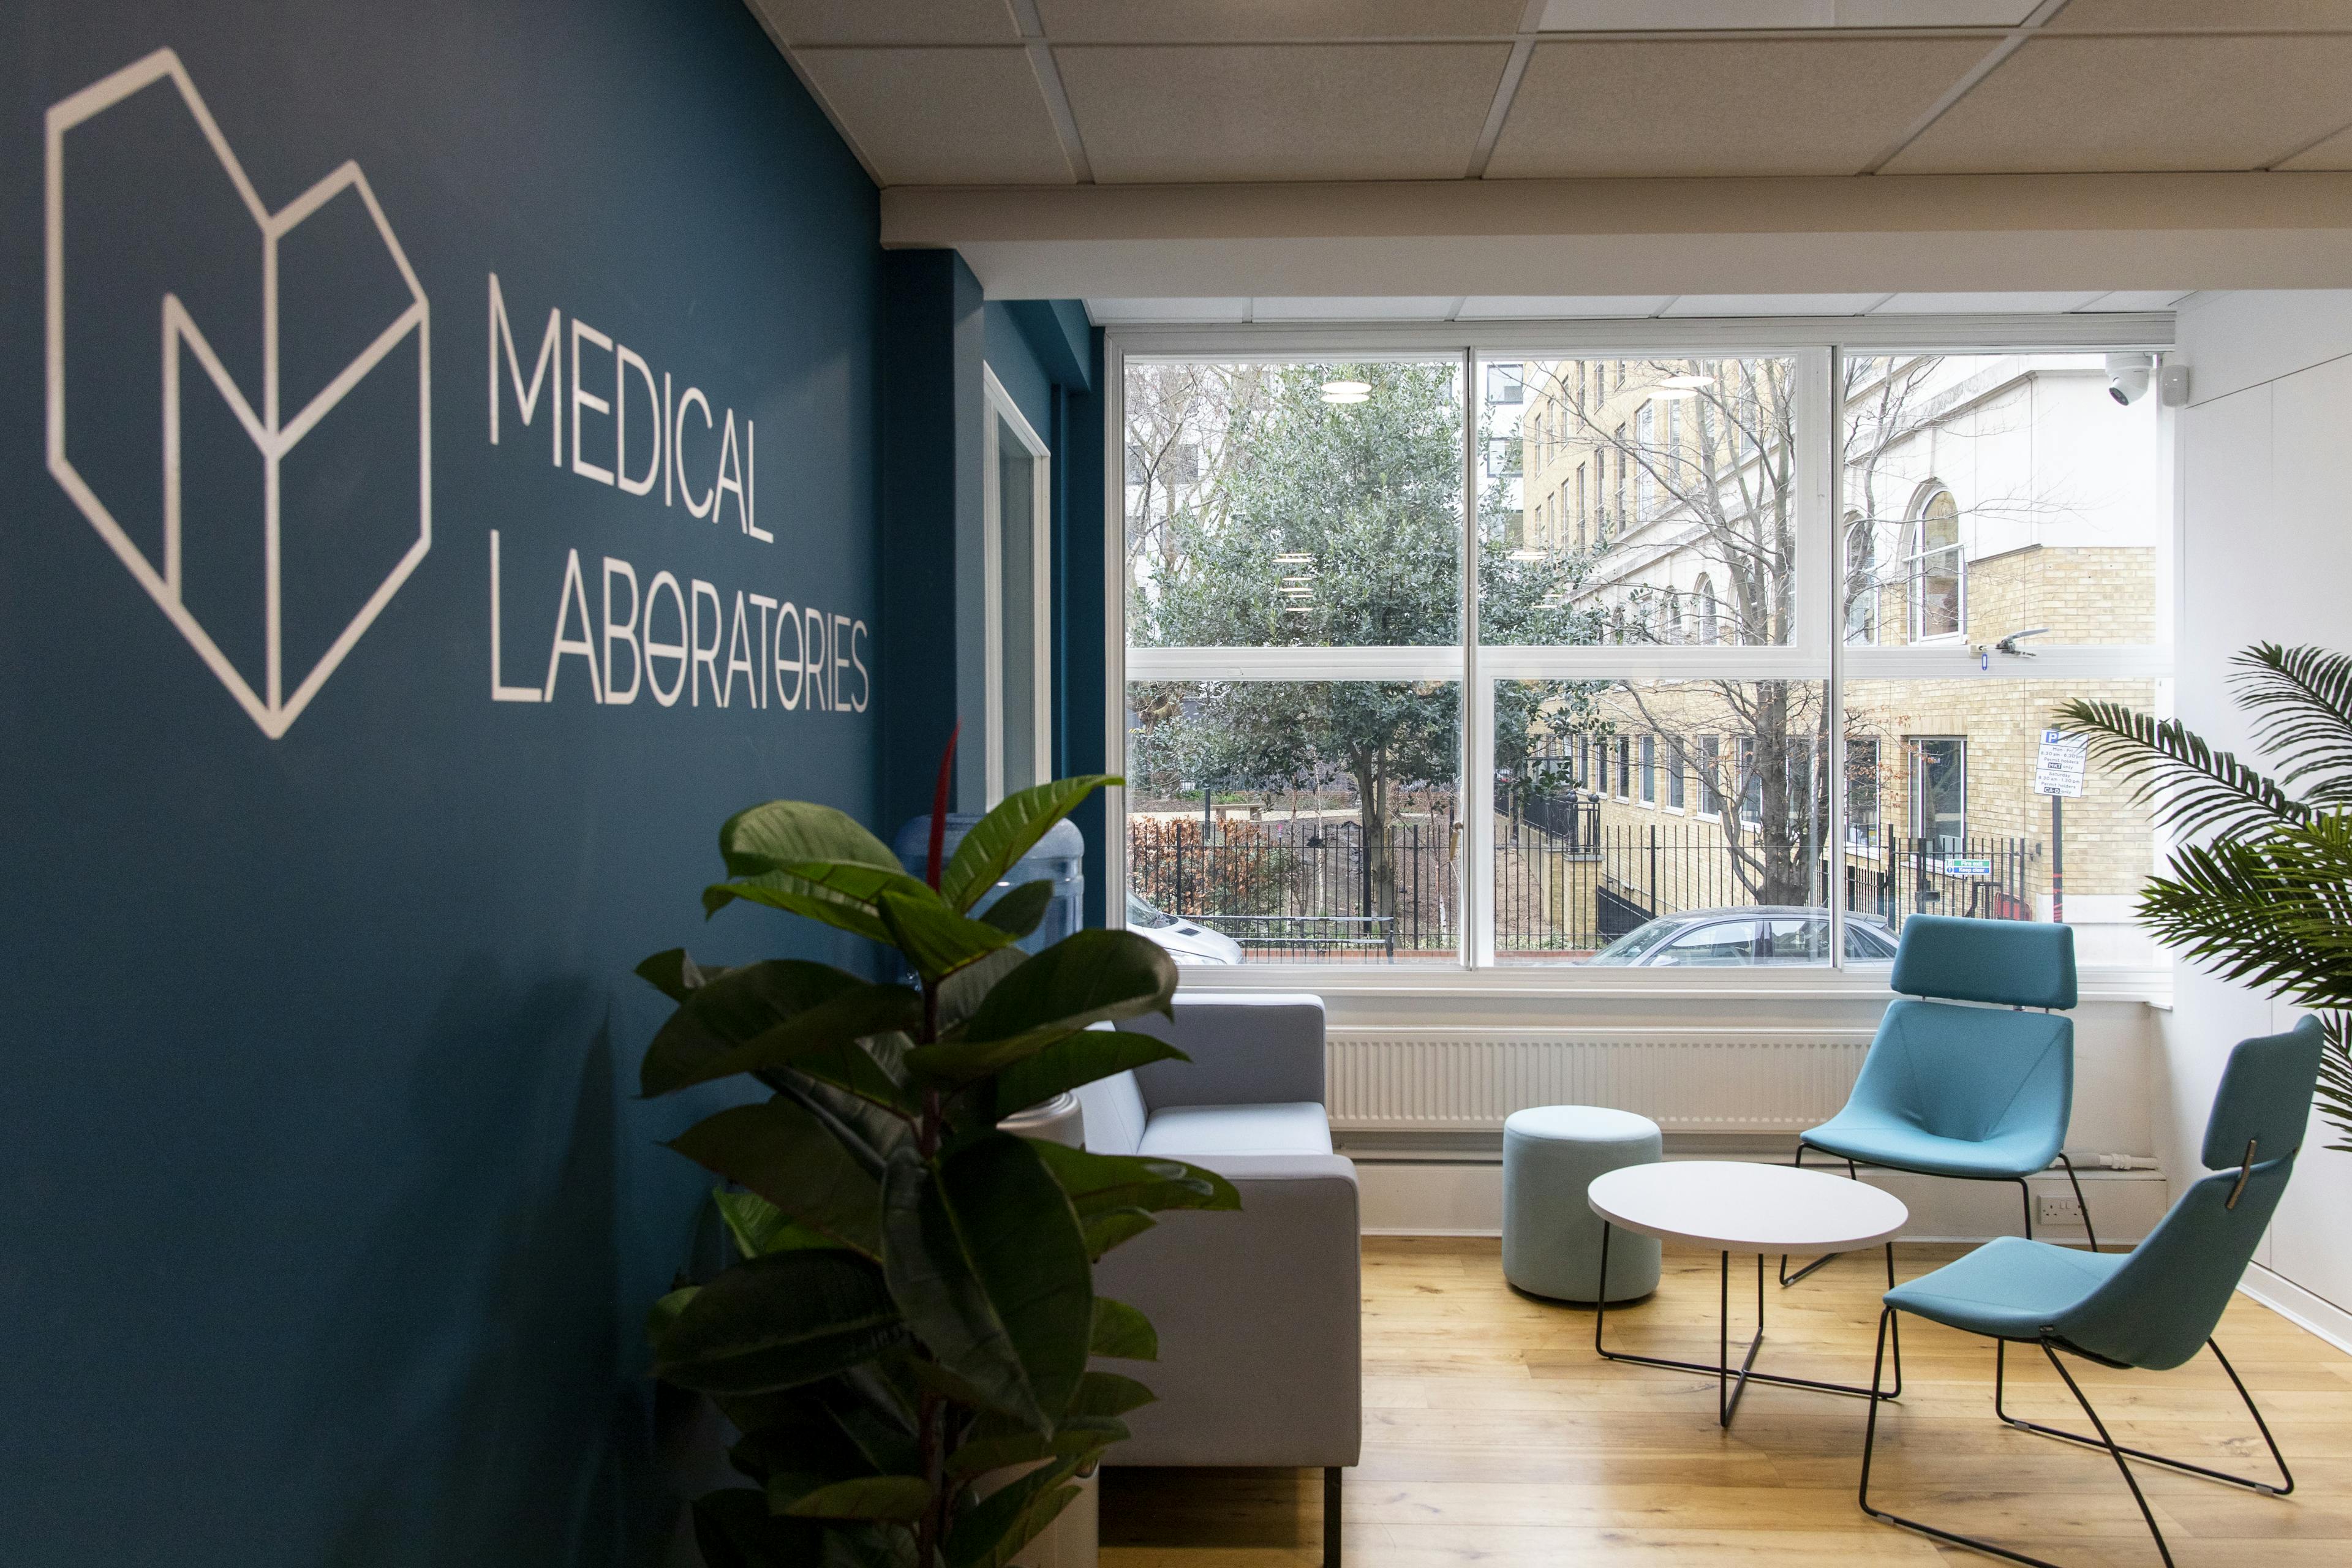 Medical Laboratories - our new Healthcare facility and laboratory in Central London!